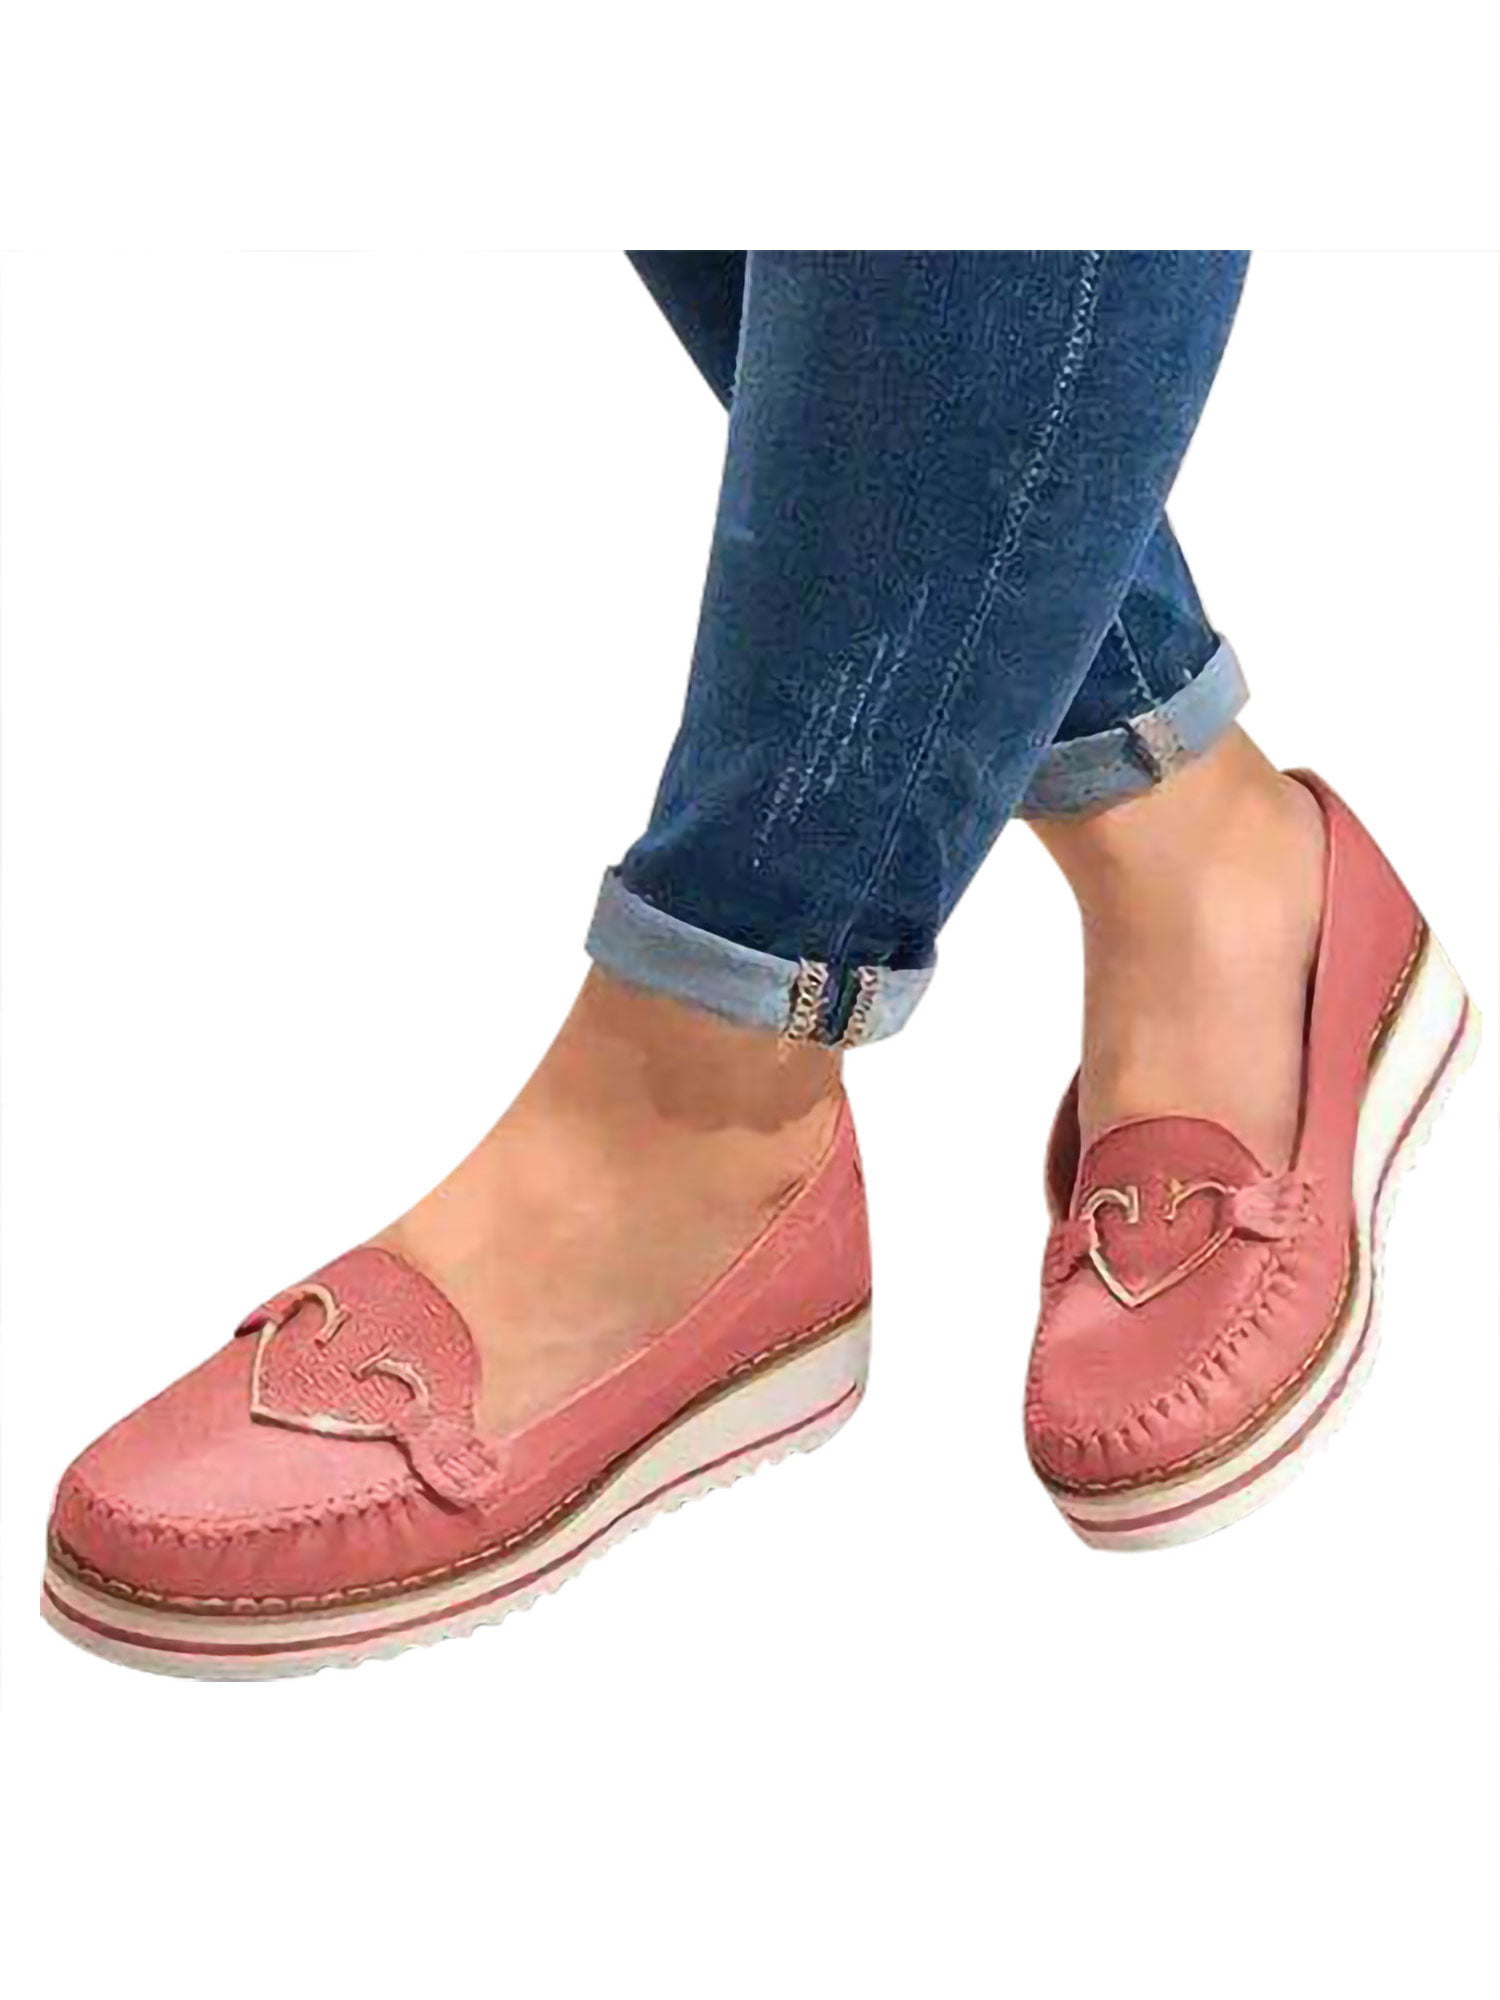 Women's Loafers Stylish Square Toe Slip-On Shoes Spring Autumn Wear-Resistant Breathable Low-Top Footwear Elegant Office Shoes 